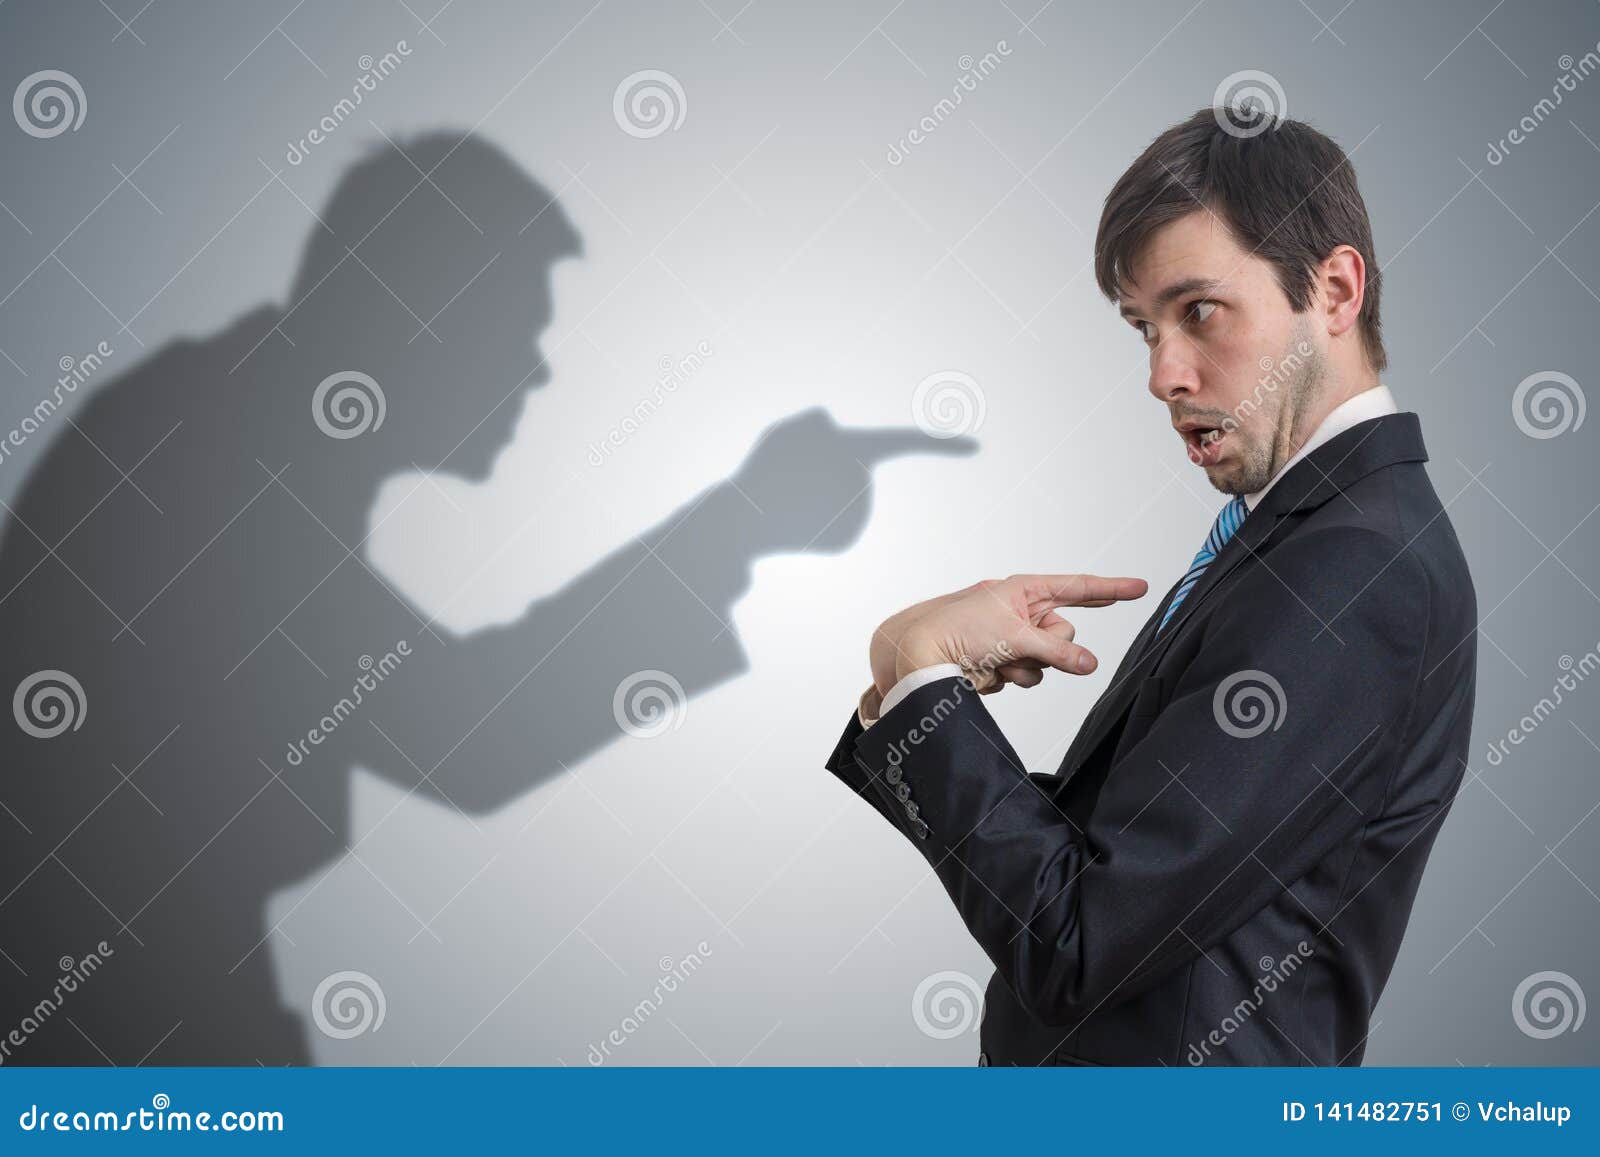 shadow of man is pointing and blaming businessman. conscience concept.